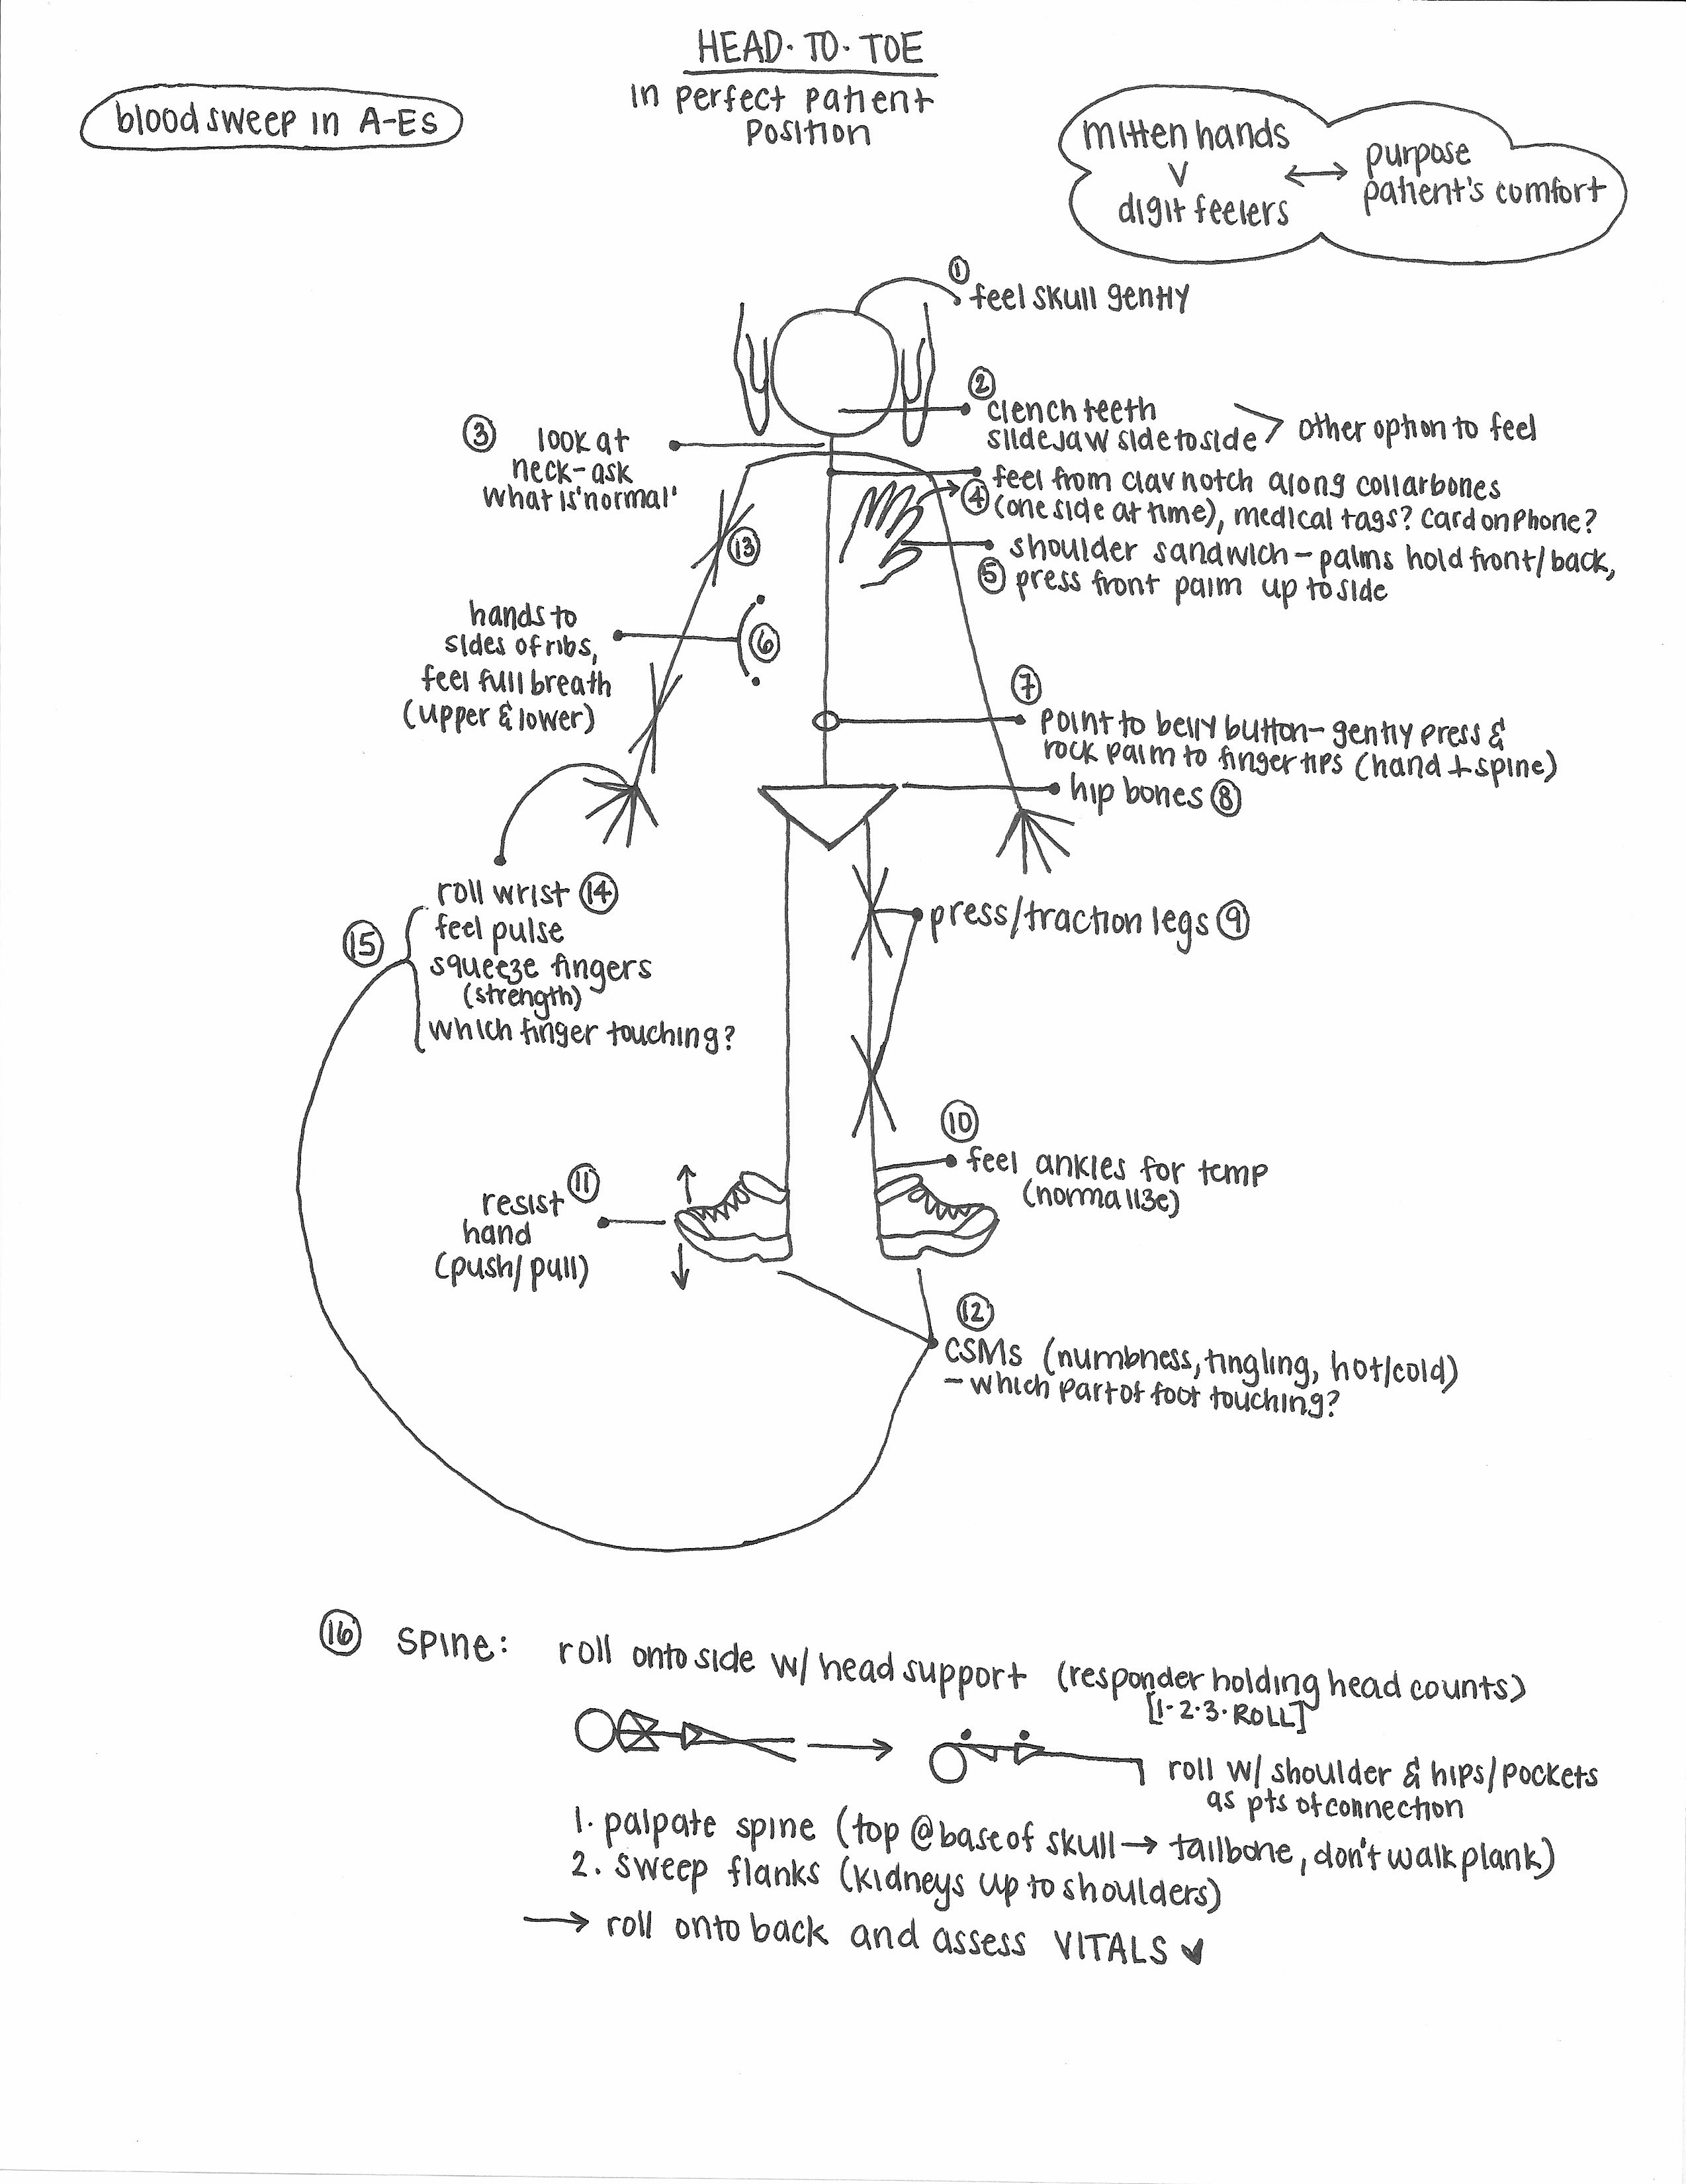 Numbered drawing of the head-to-toe exam with stick figure and notes